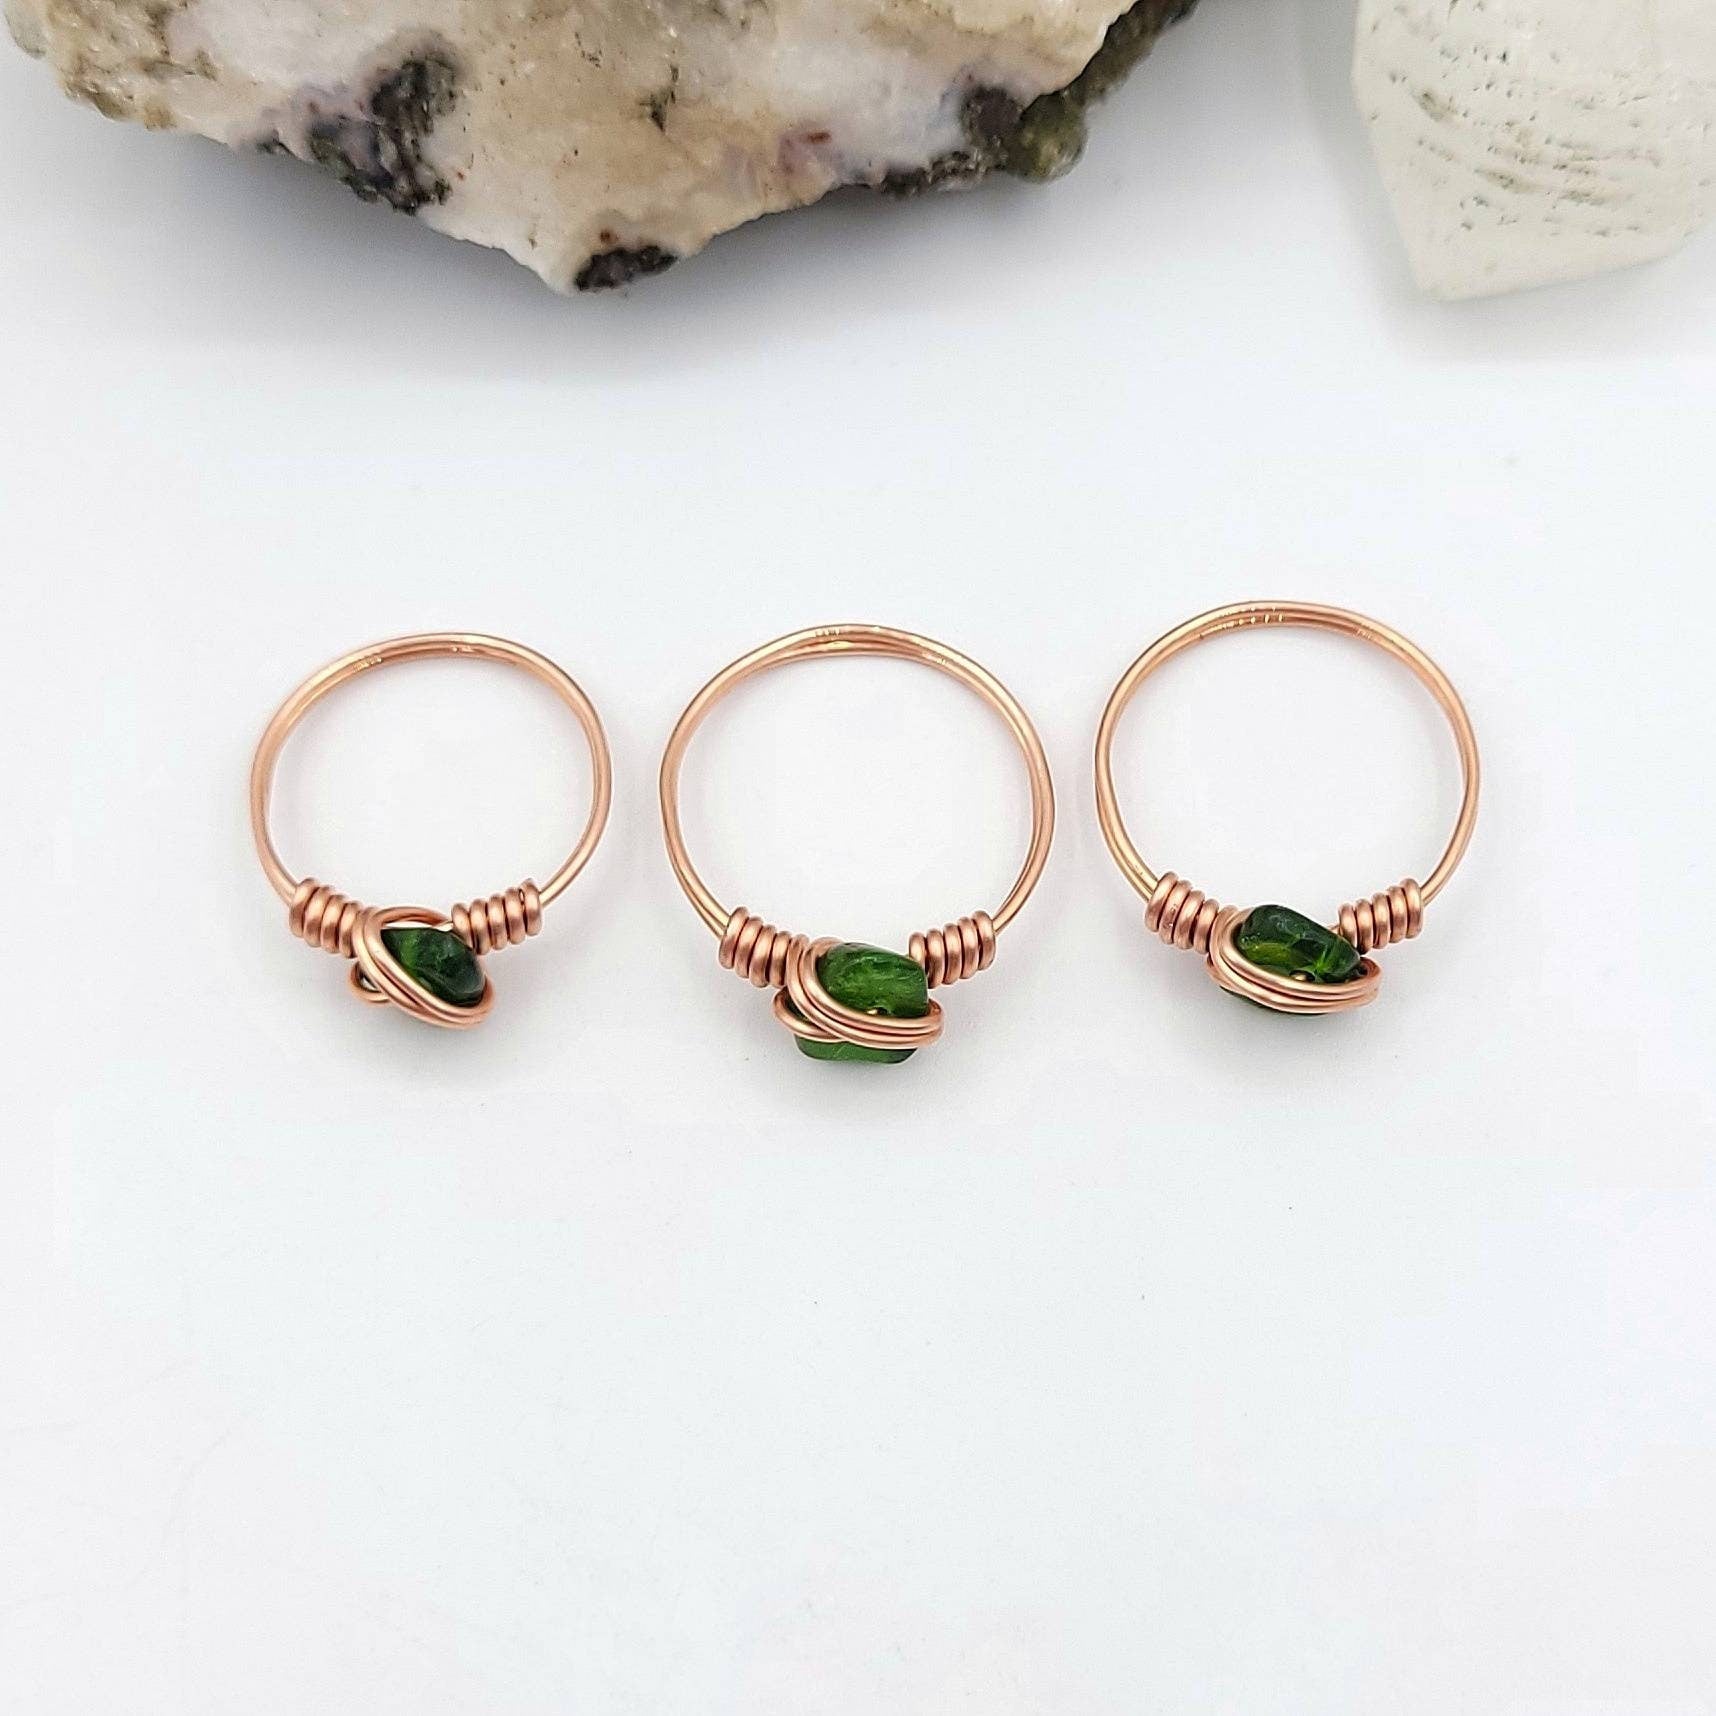 Chrome Diopside Ring, Copper Wire Wrapped Ring